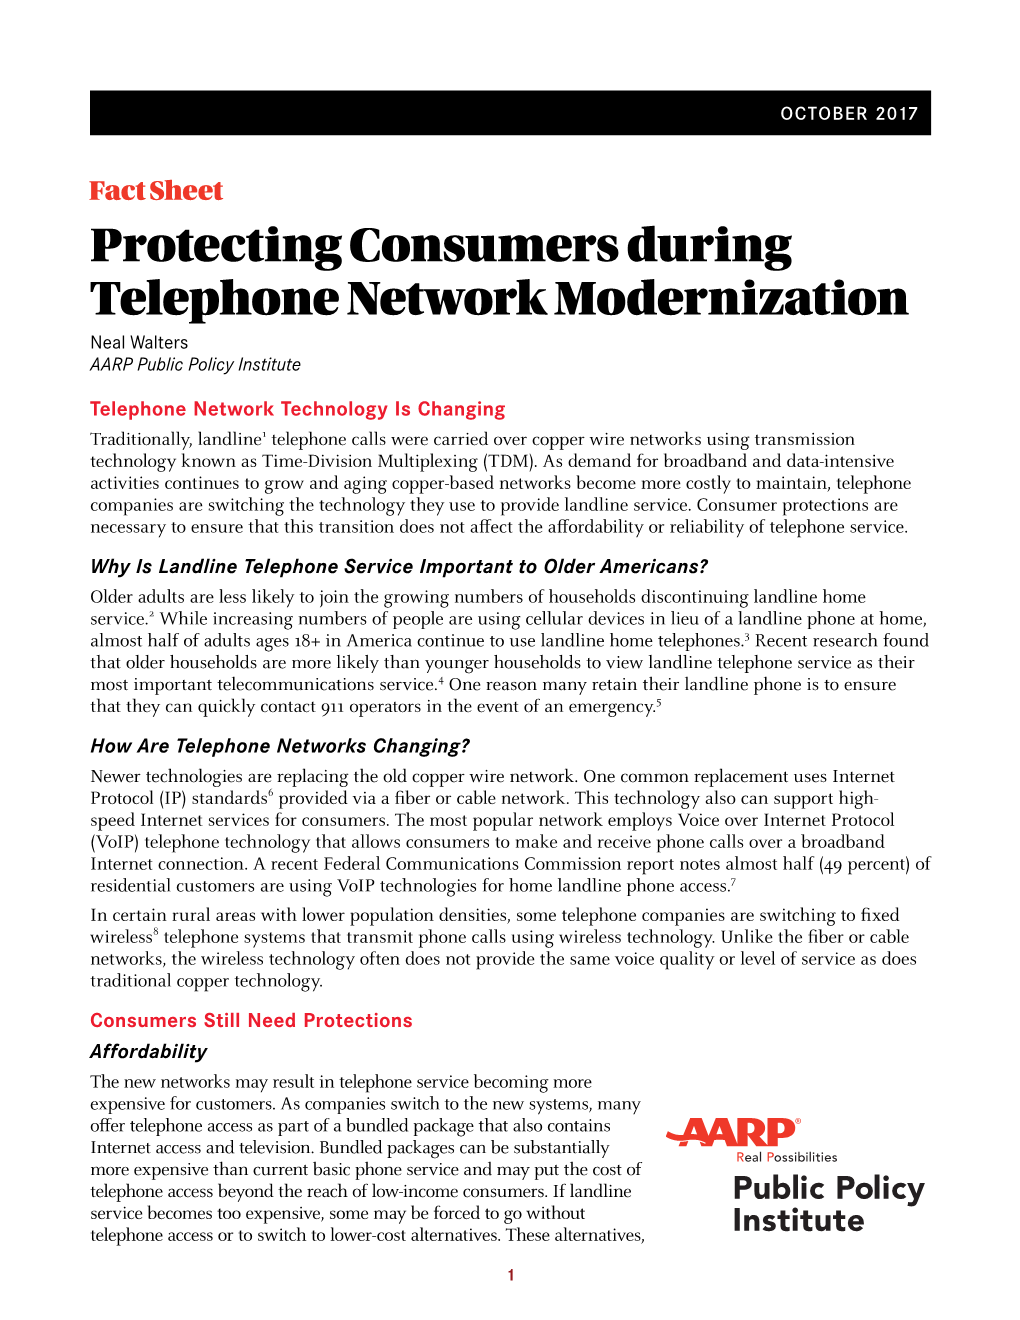 Protecting Consumers During Telephone Network Modernization Neal Walters AARP Public Policy Institute